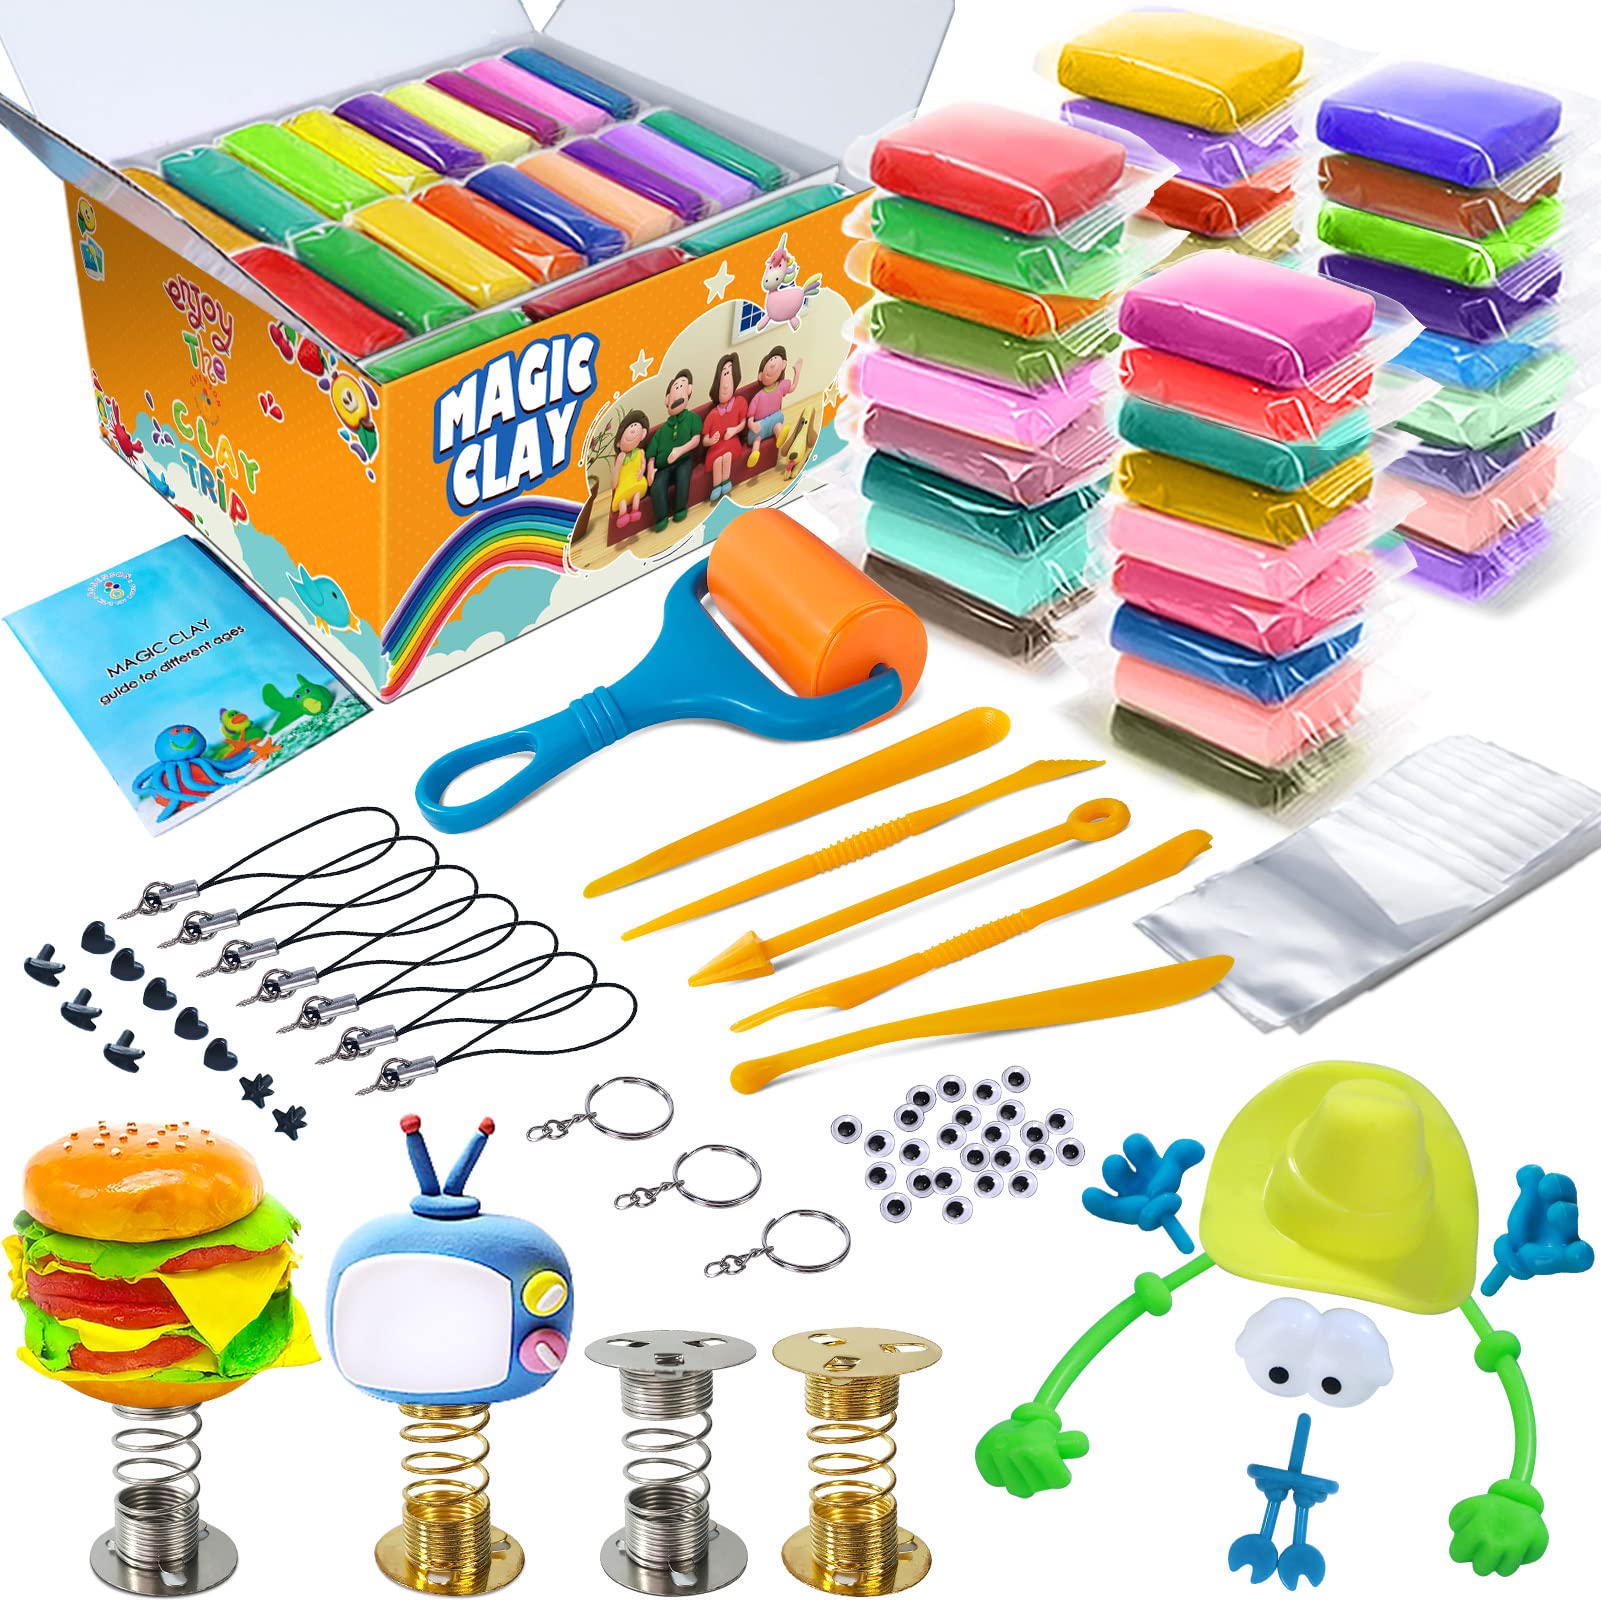 Polymer Clay Kit, 56 Colors Modeling Clay, DIY Oven Bake Molding Clay for  Kids